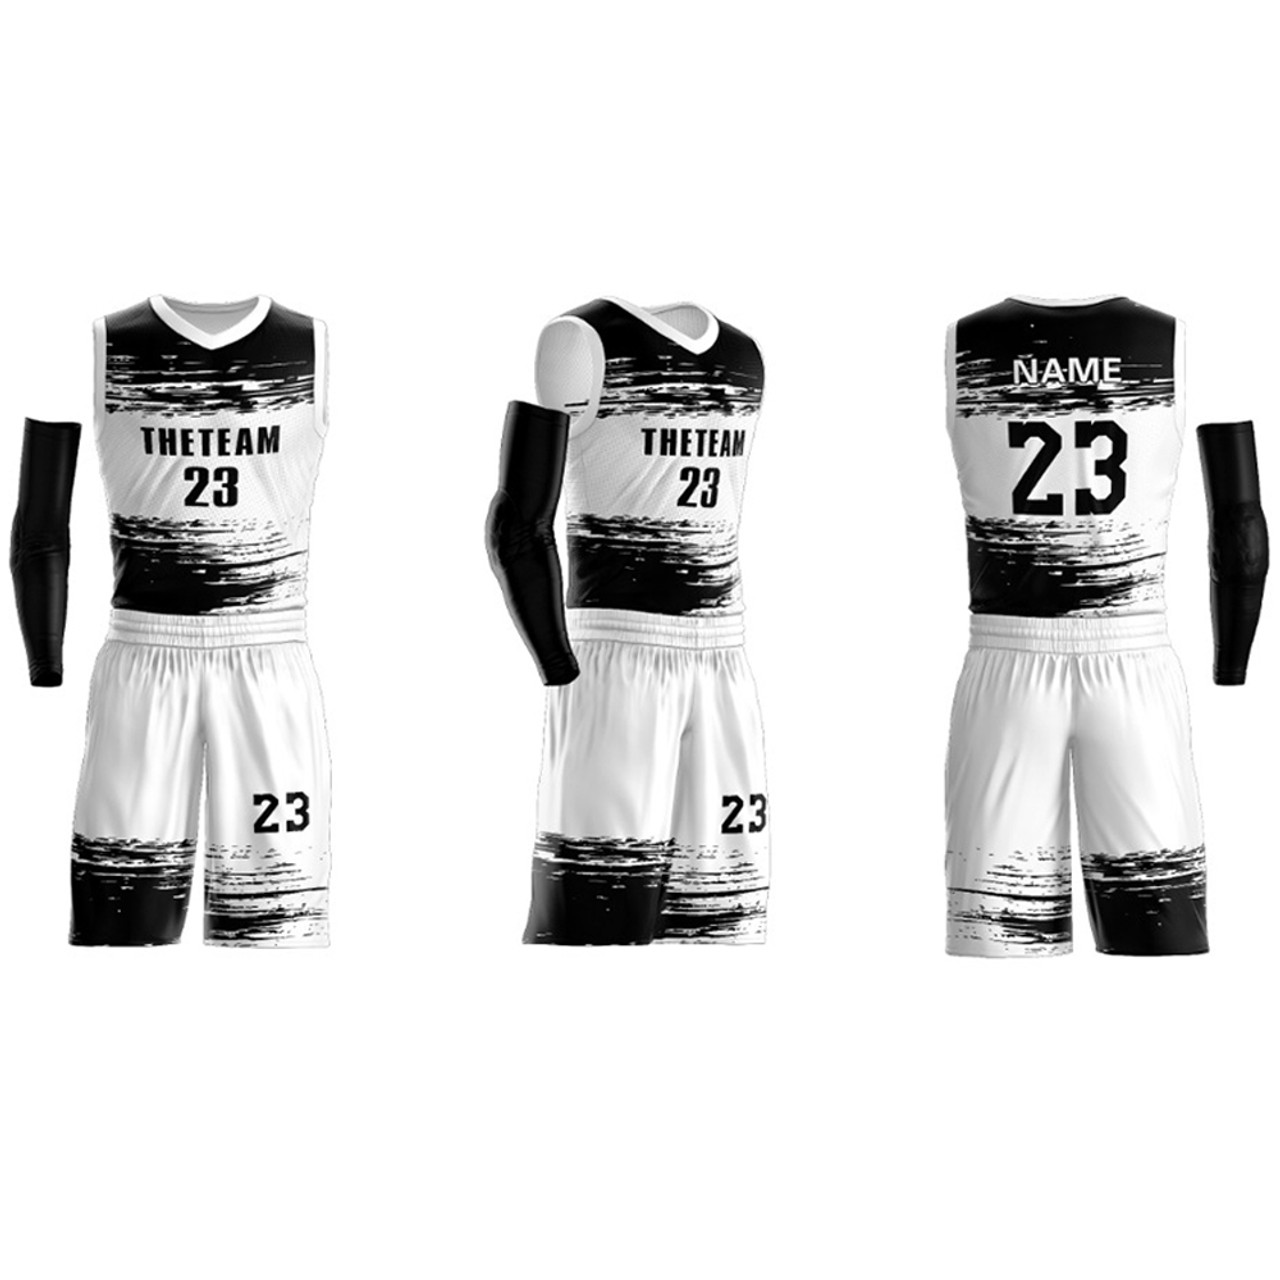 Men's And Youth V-neck Uniforms Custom Basketball Jersey Set - Make Team  Uniforms Print Team Name, Number And Your Name. White 130cm